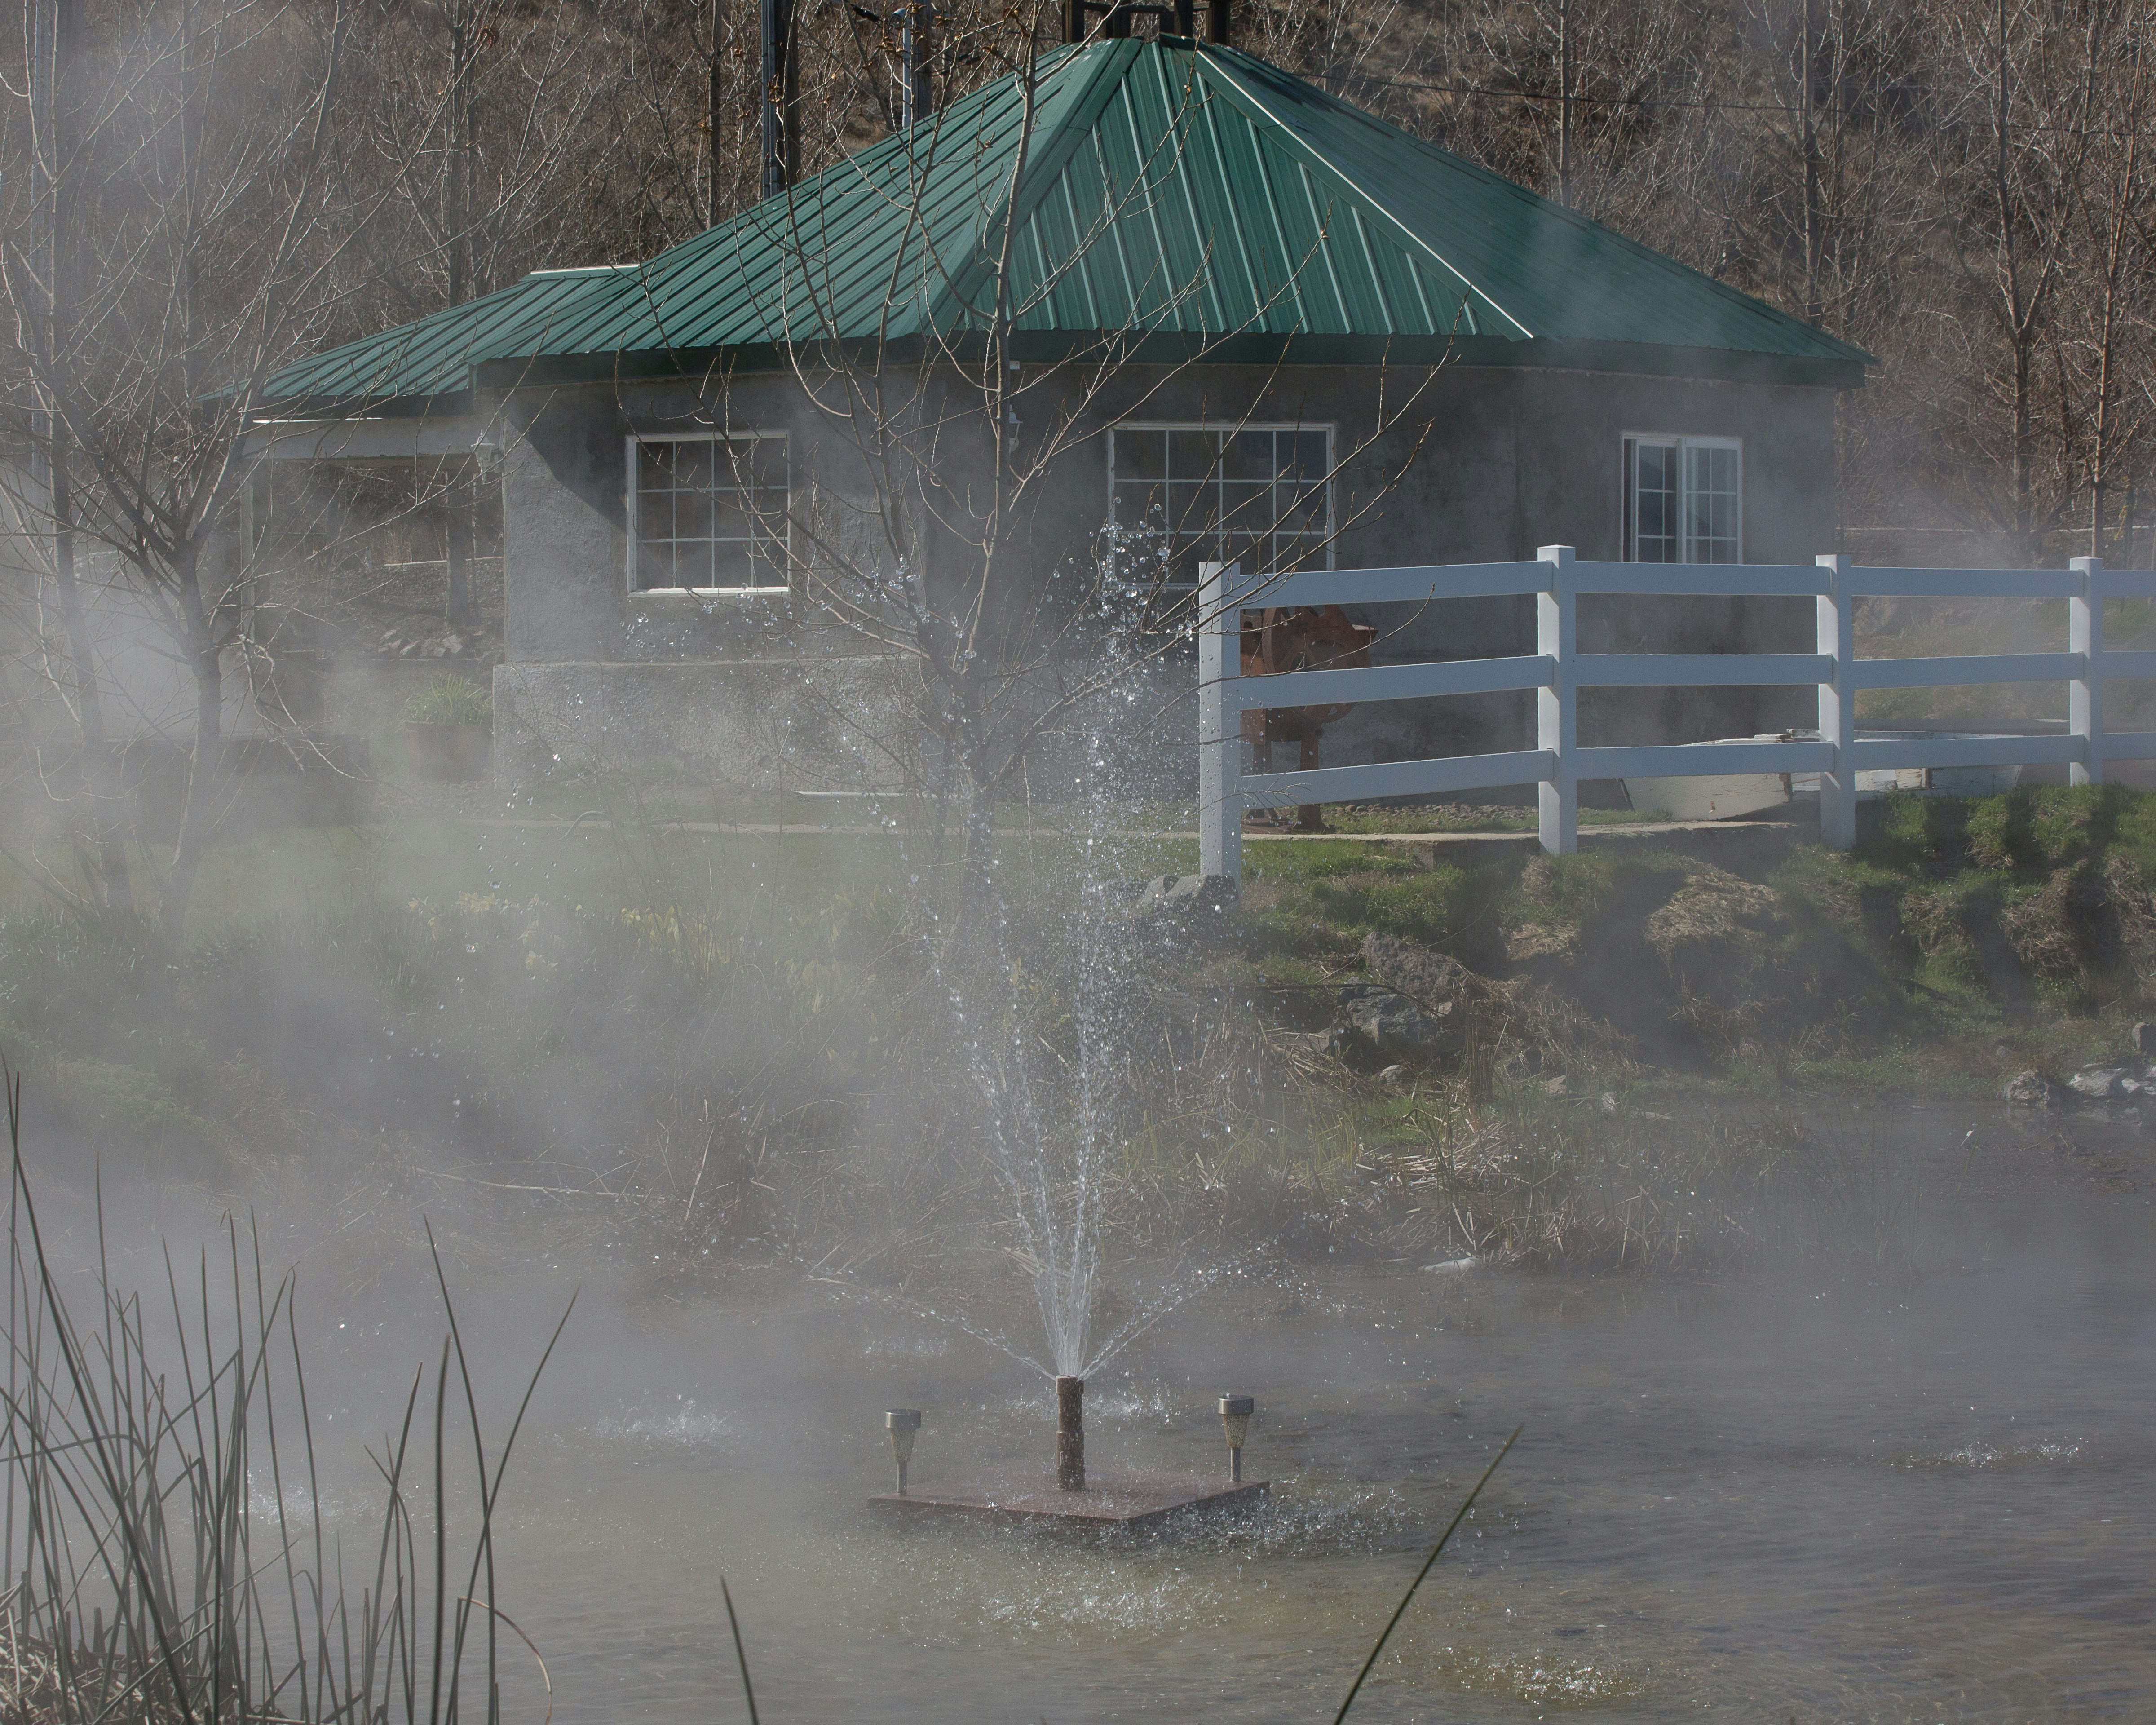 Steam and fountain spray rise from Hot Lake Springs, with a brown building with a green roof in the background